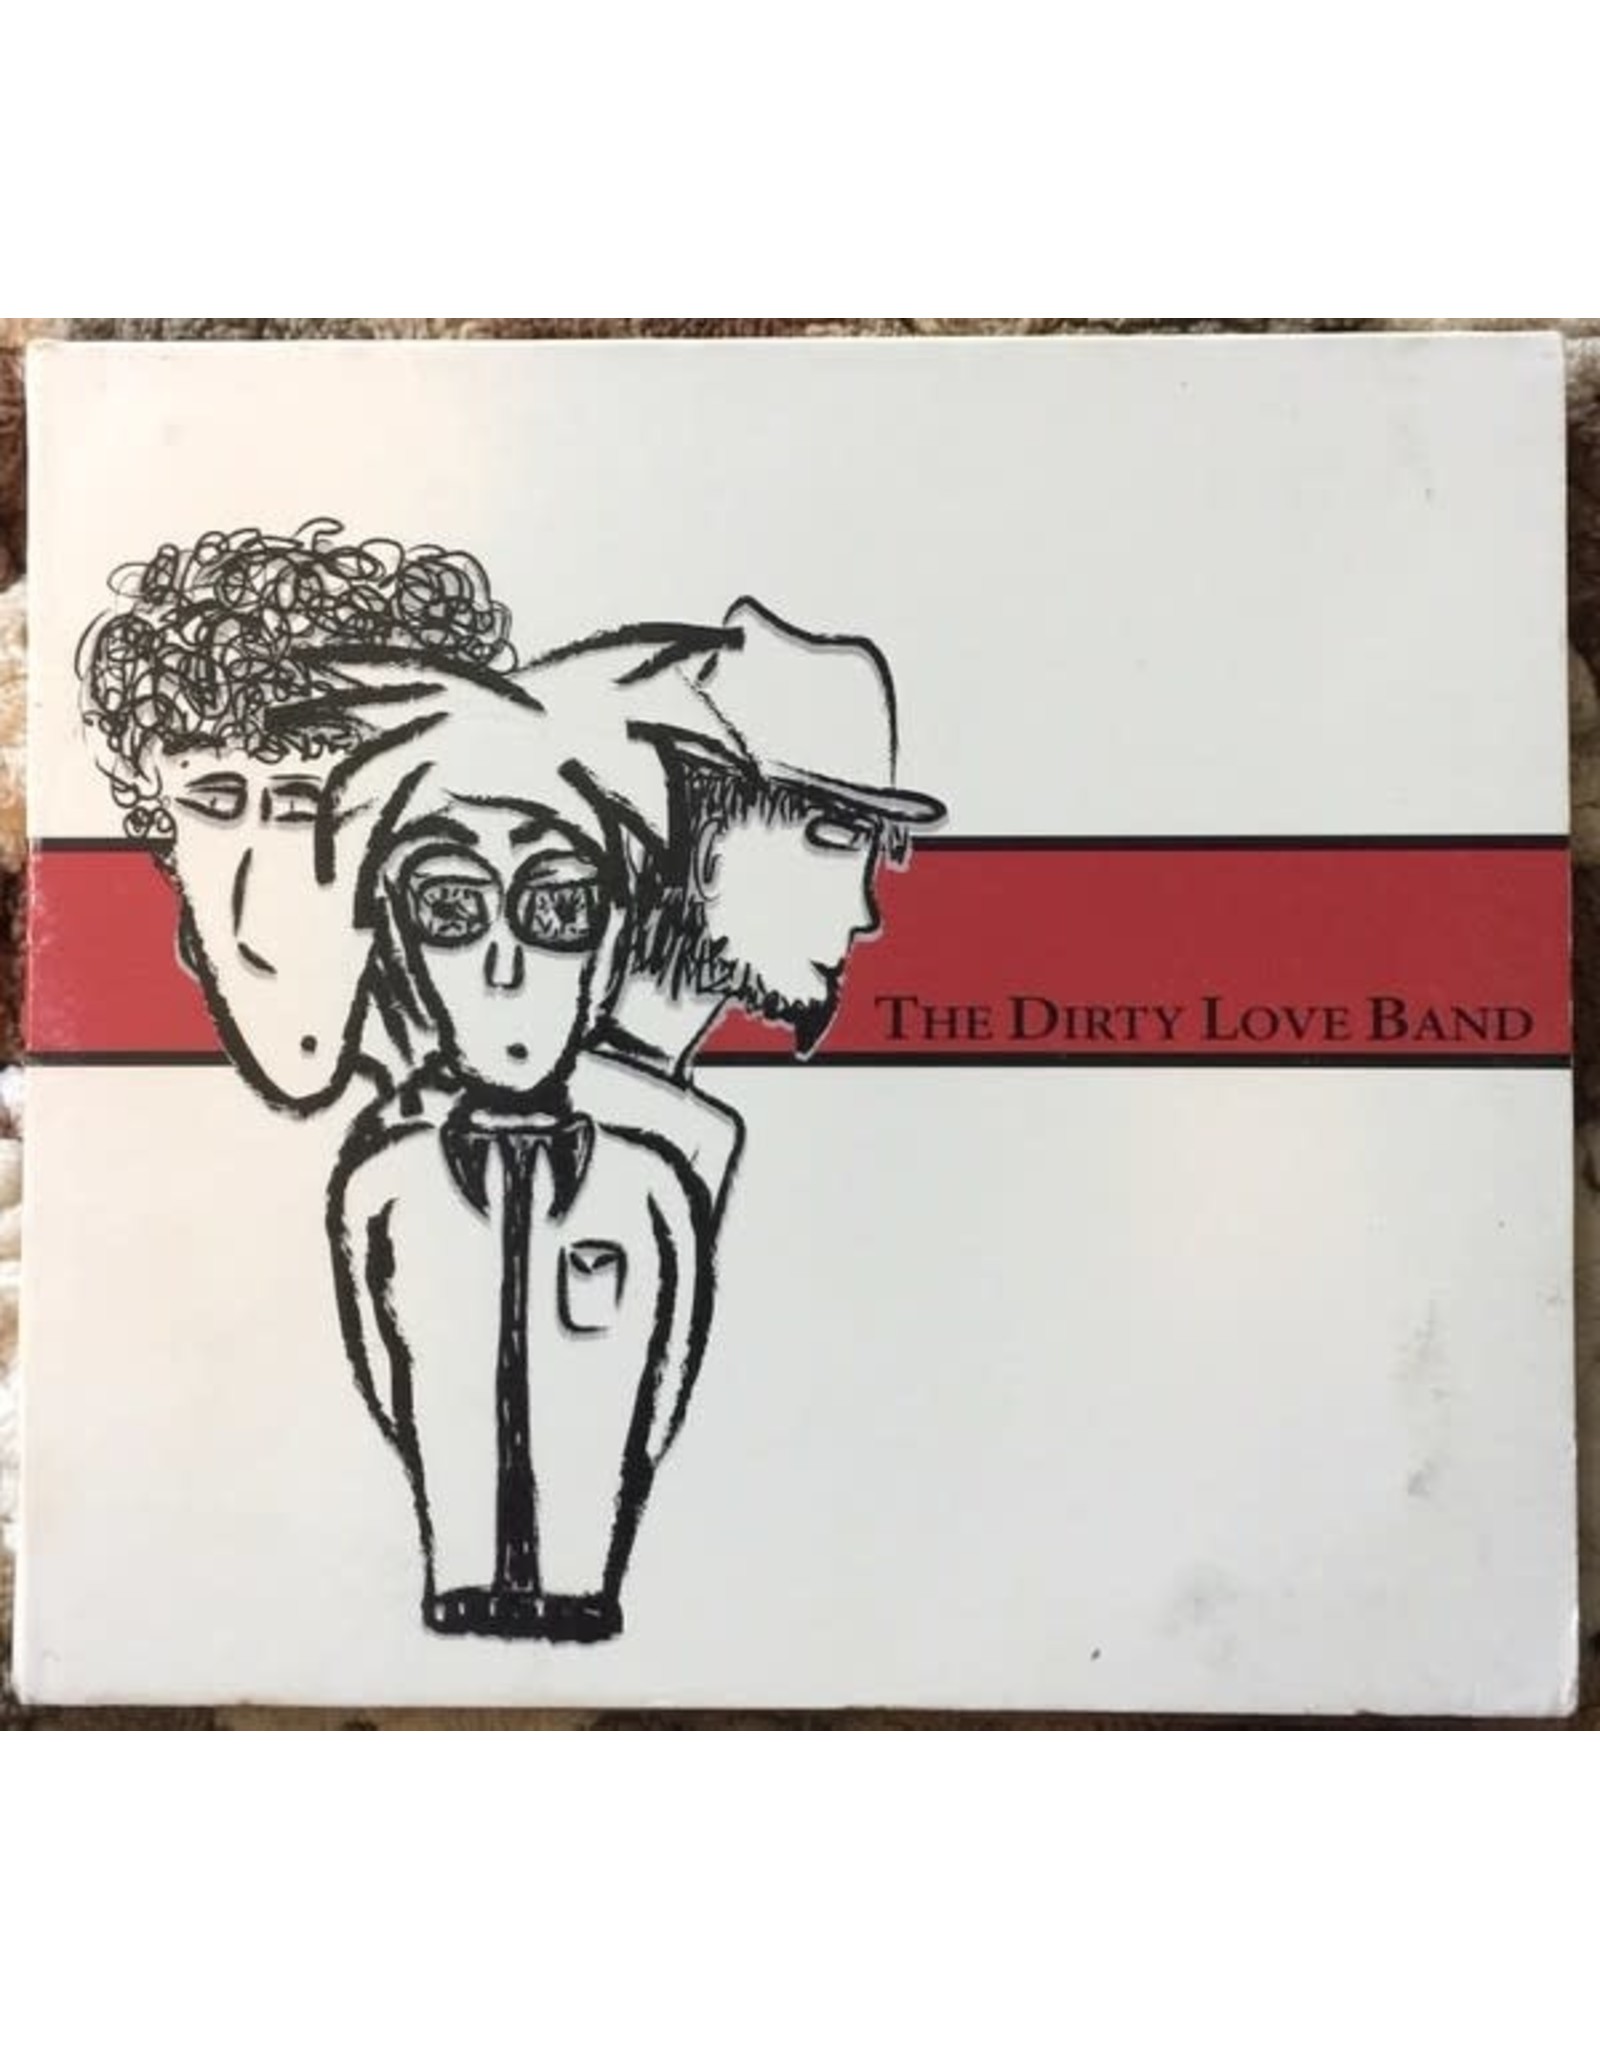 Dirty Love Band, The - The Dirty Love Band CD